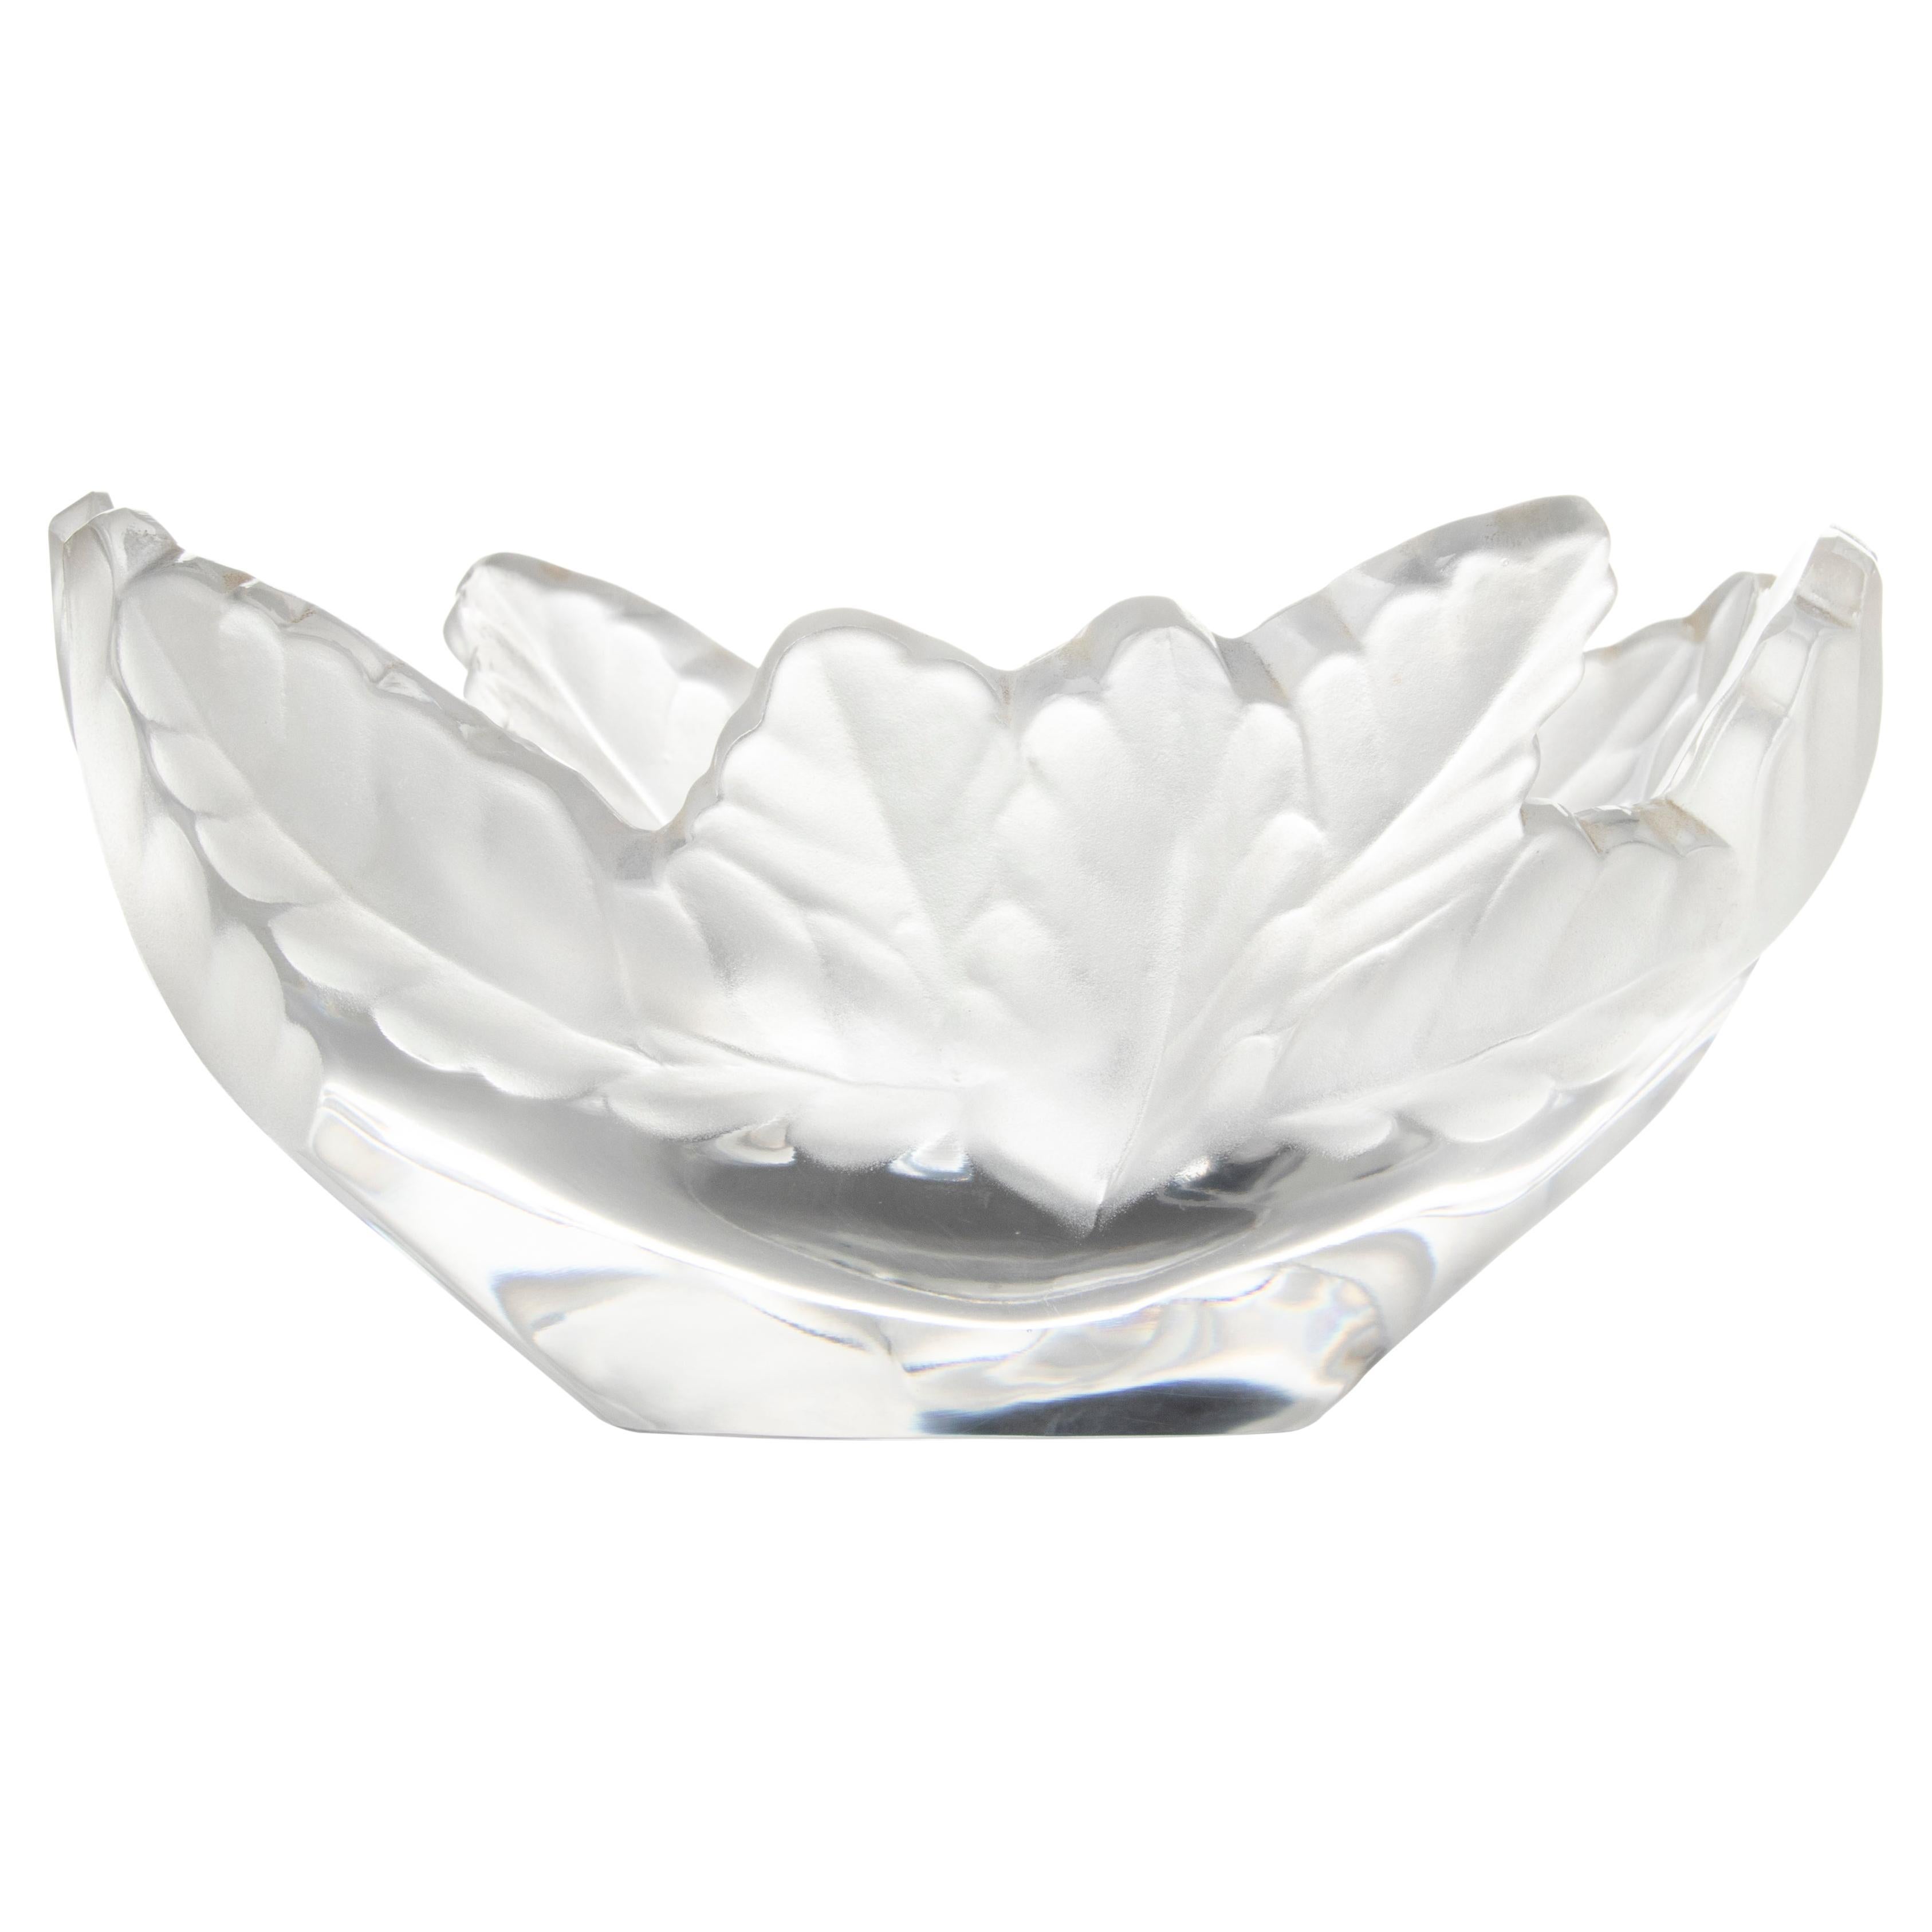 Mid 20th Century Modern Frosted Crystal Bowl by Lalique Model "Compiegne"